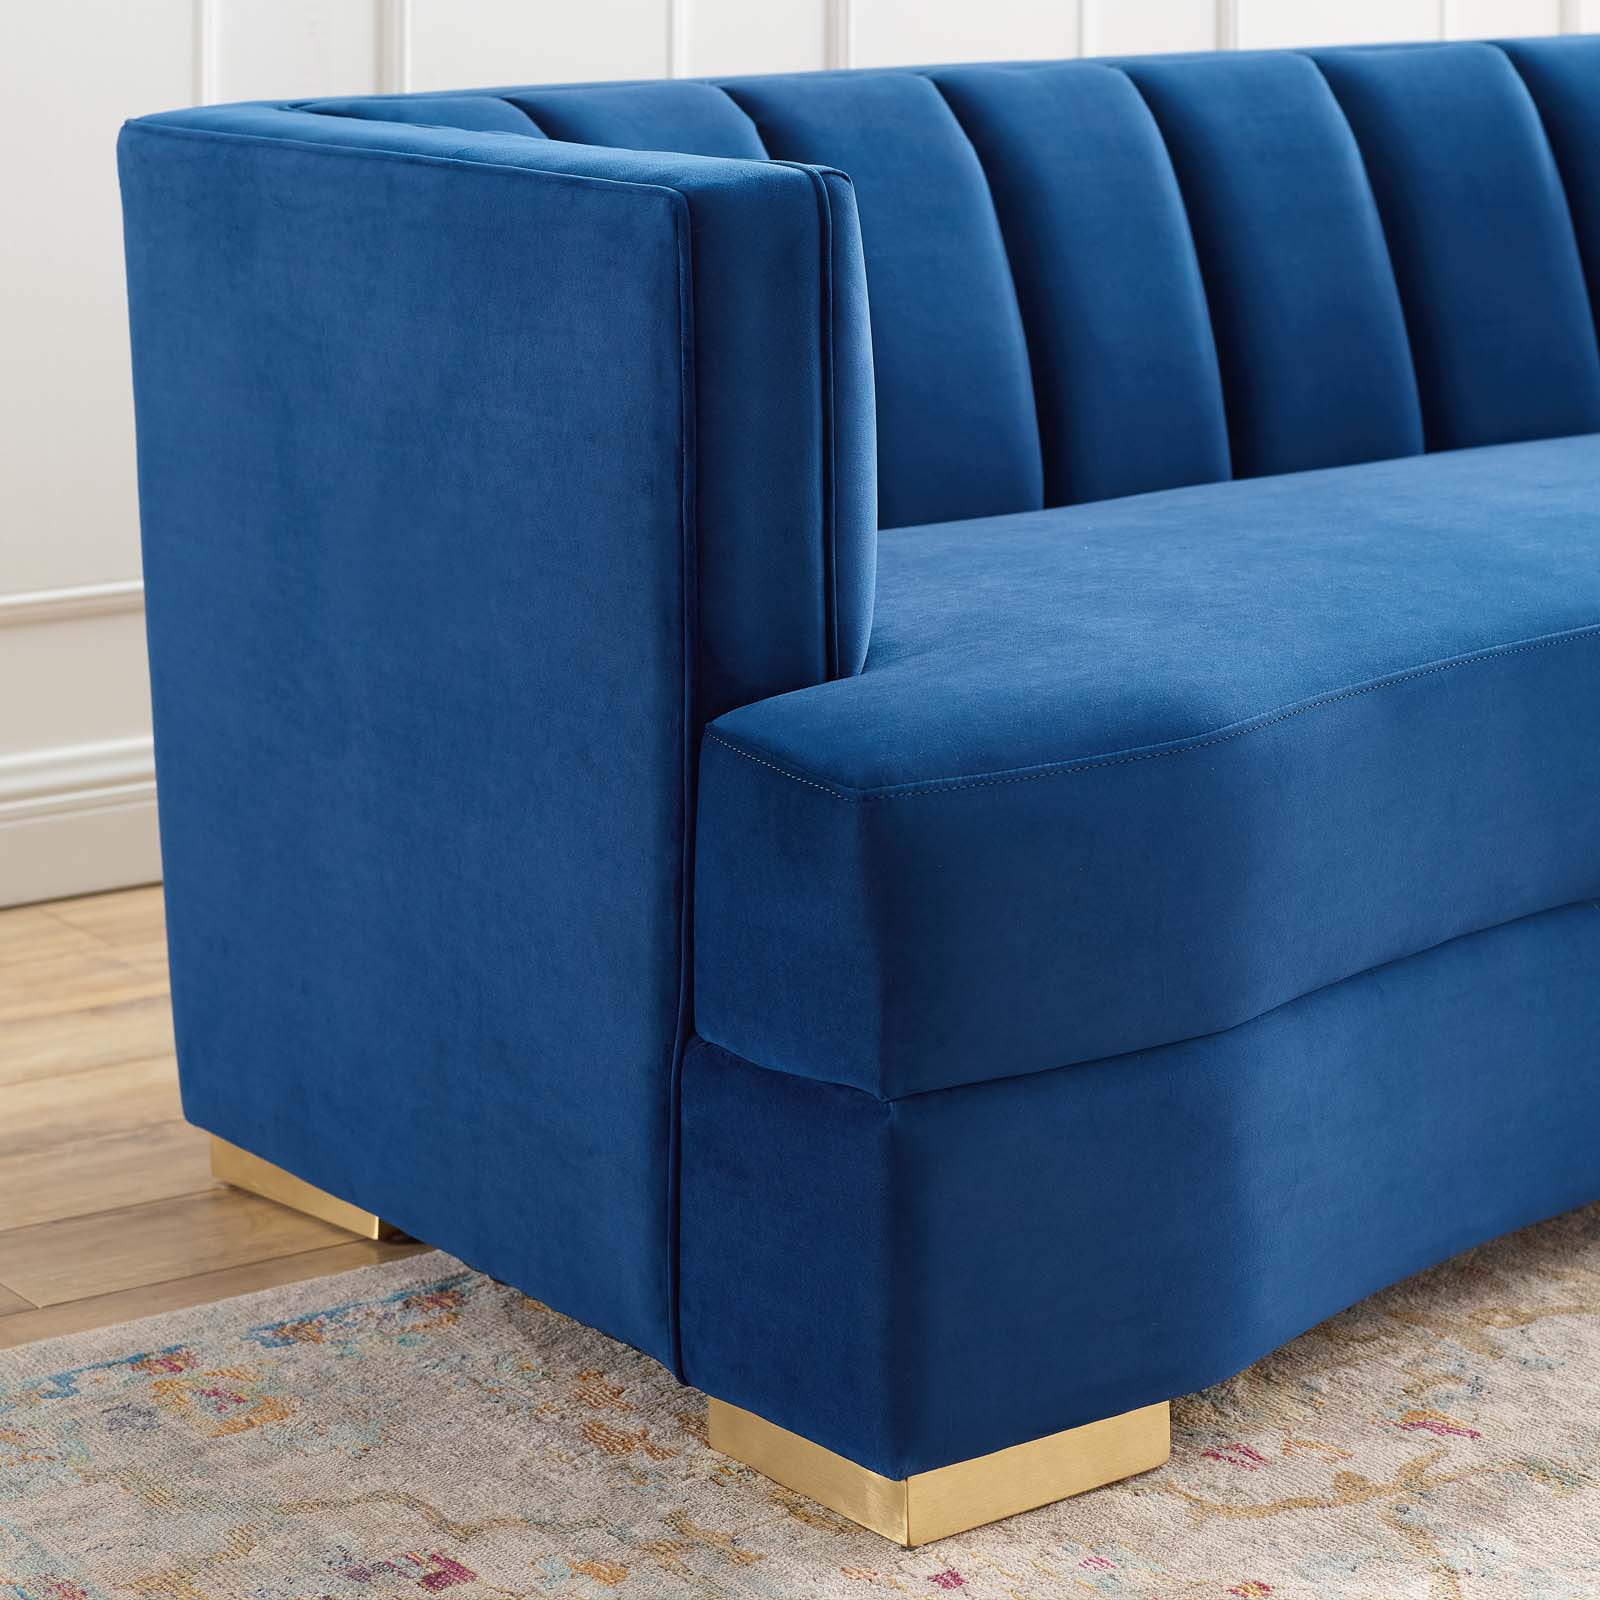 Encompass Channel Tufted Performance Velvet Curved Sofa Navy ...